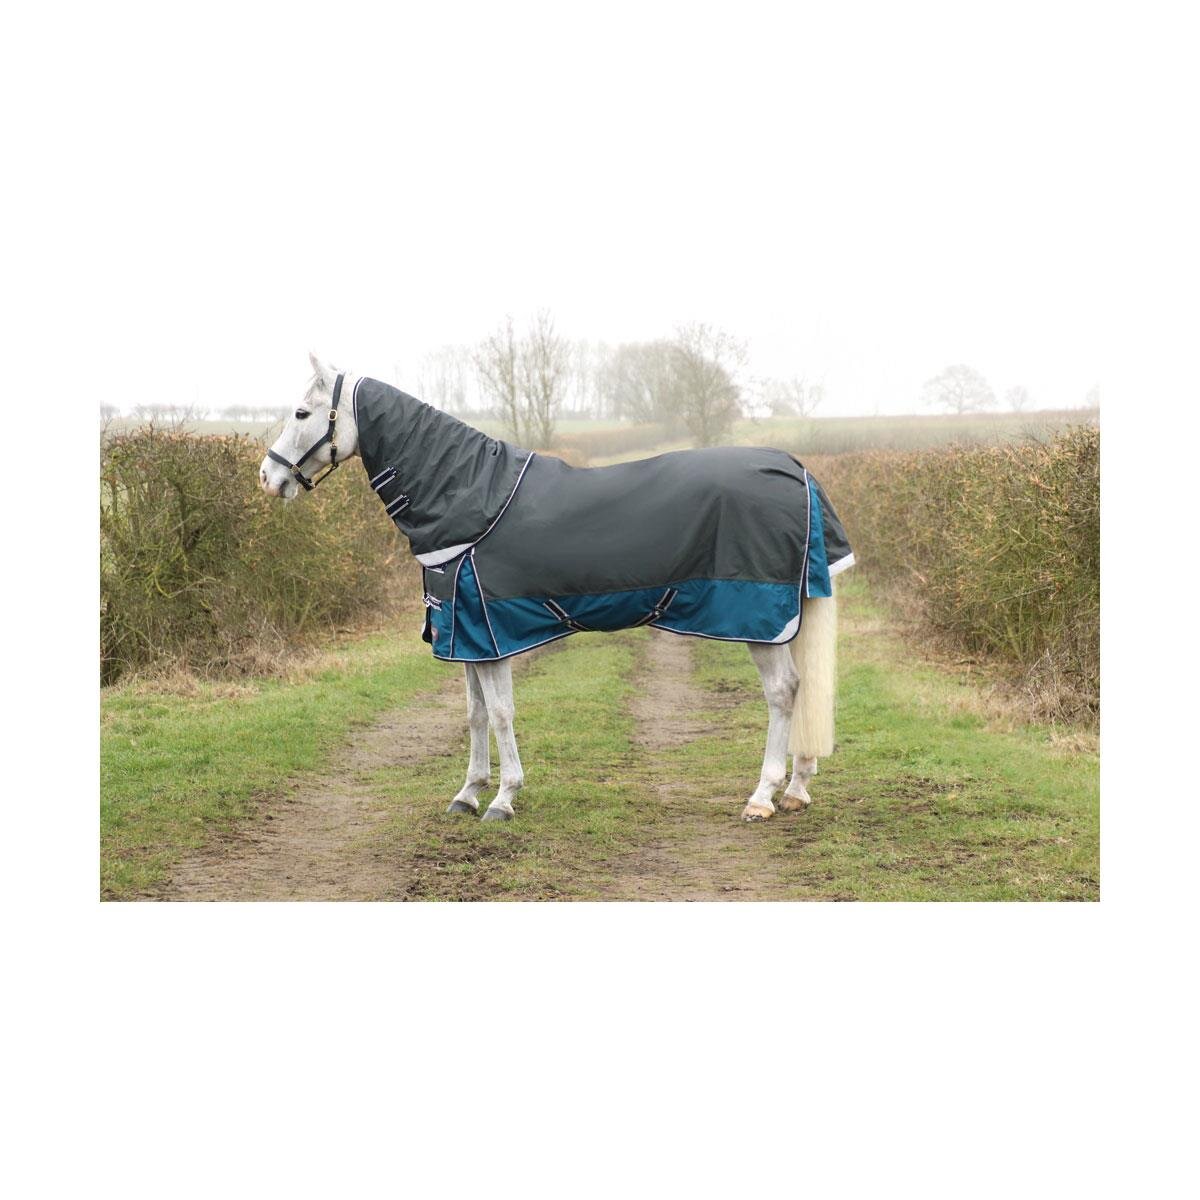 DefenceX System 50 Turnout Rug with Detachable Neck Cover